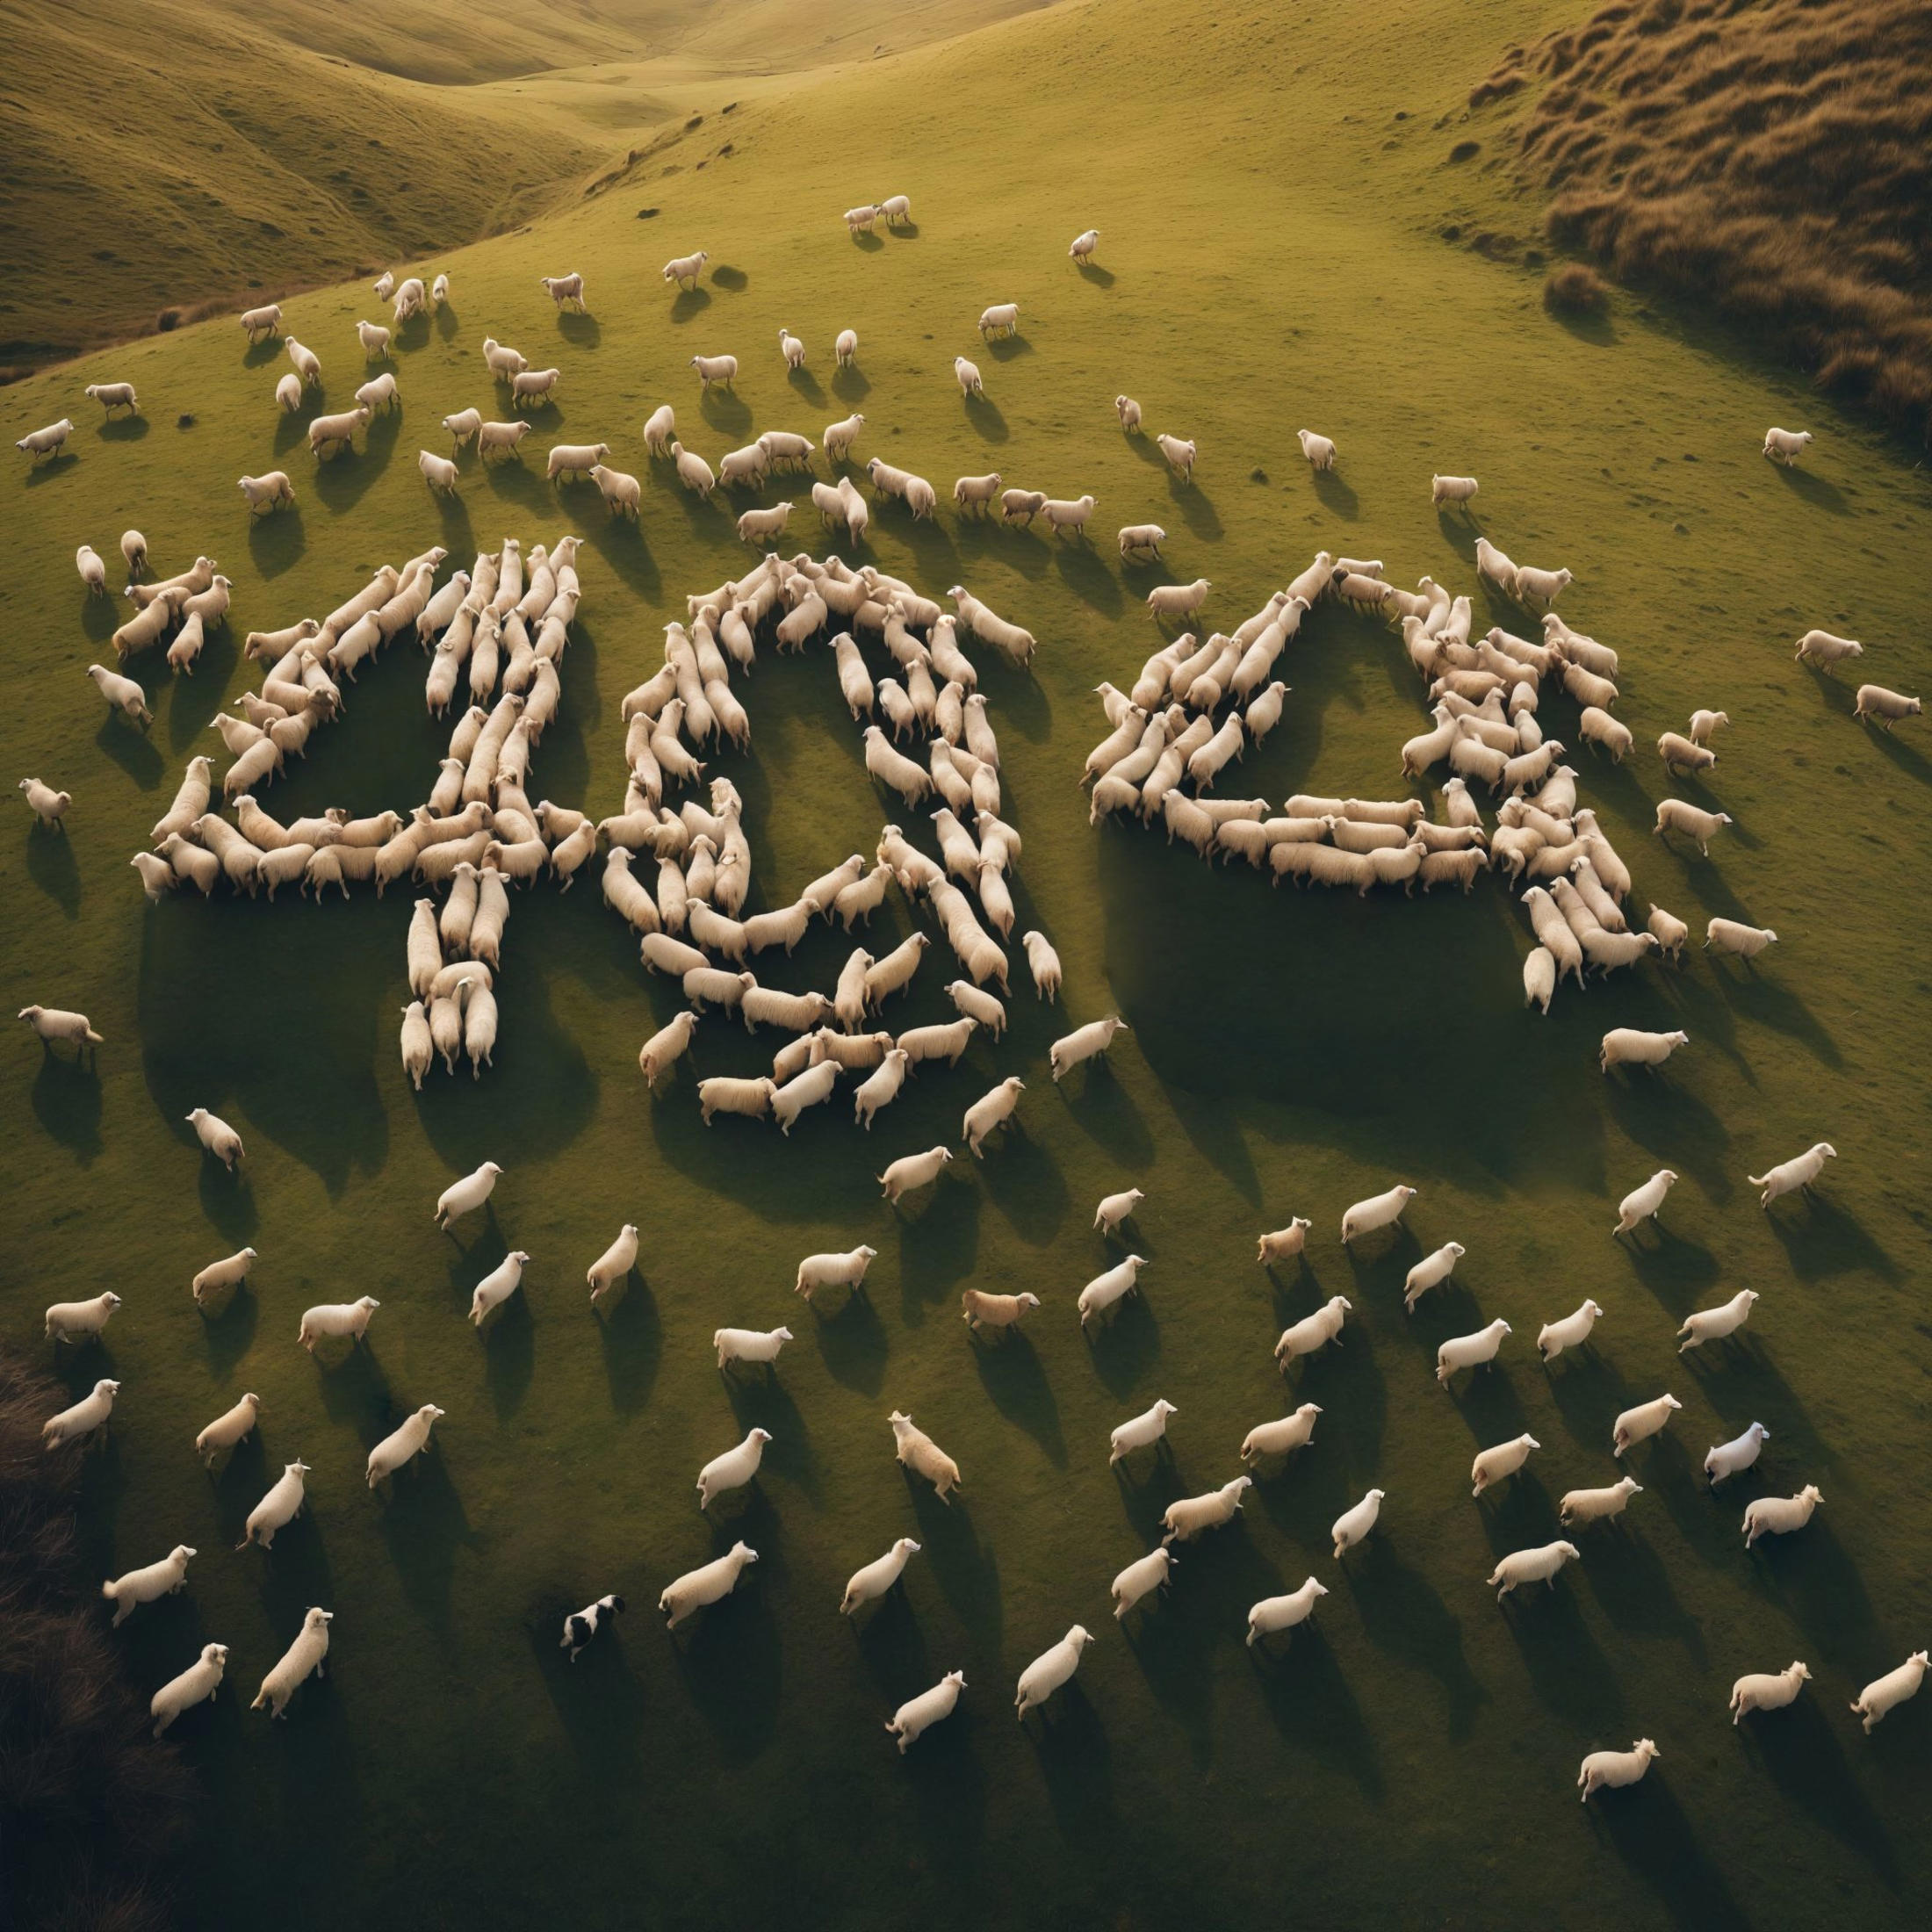 A large herd of sheep forming the number 40 on a grassy hillside.